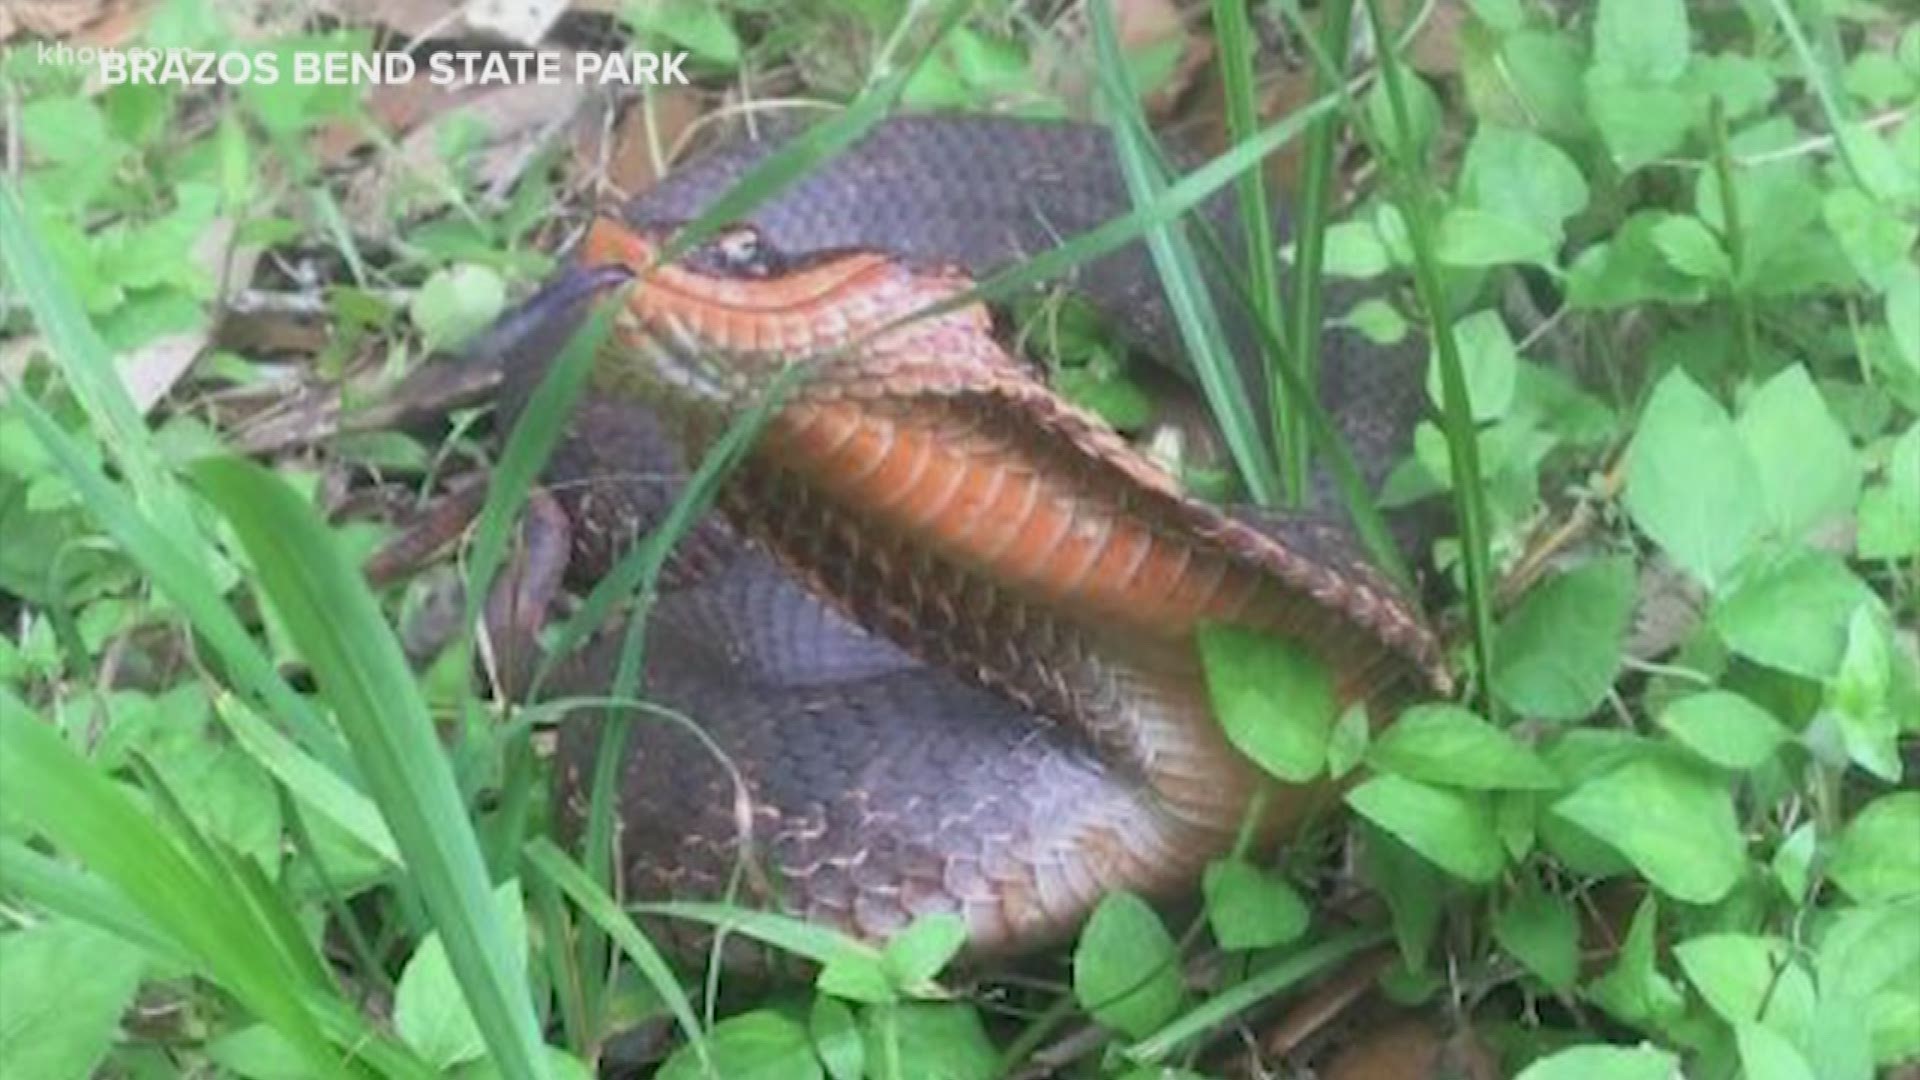 A hog-nose snake was found at Brazos State Park, and good news, it's not venomous.